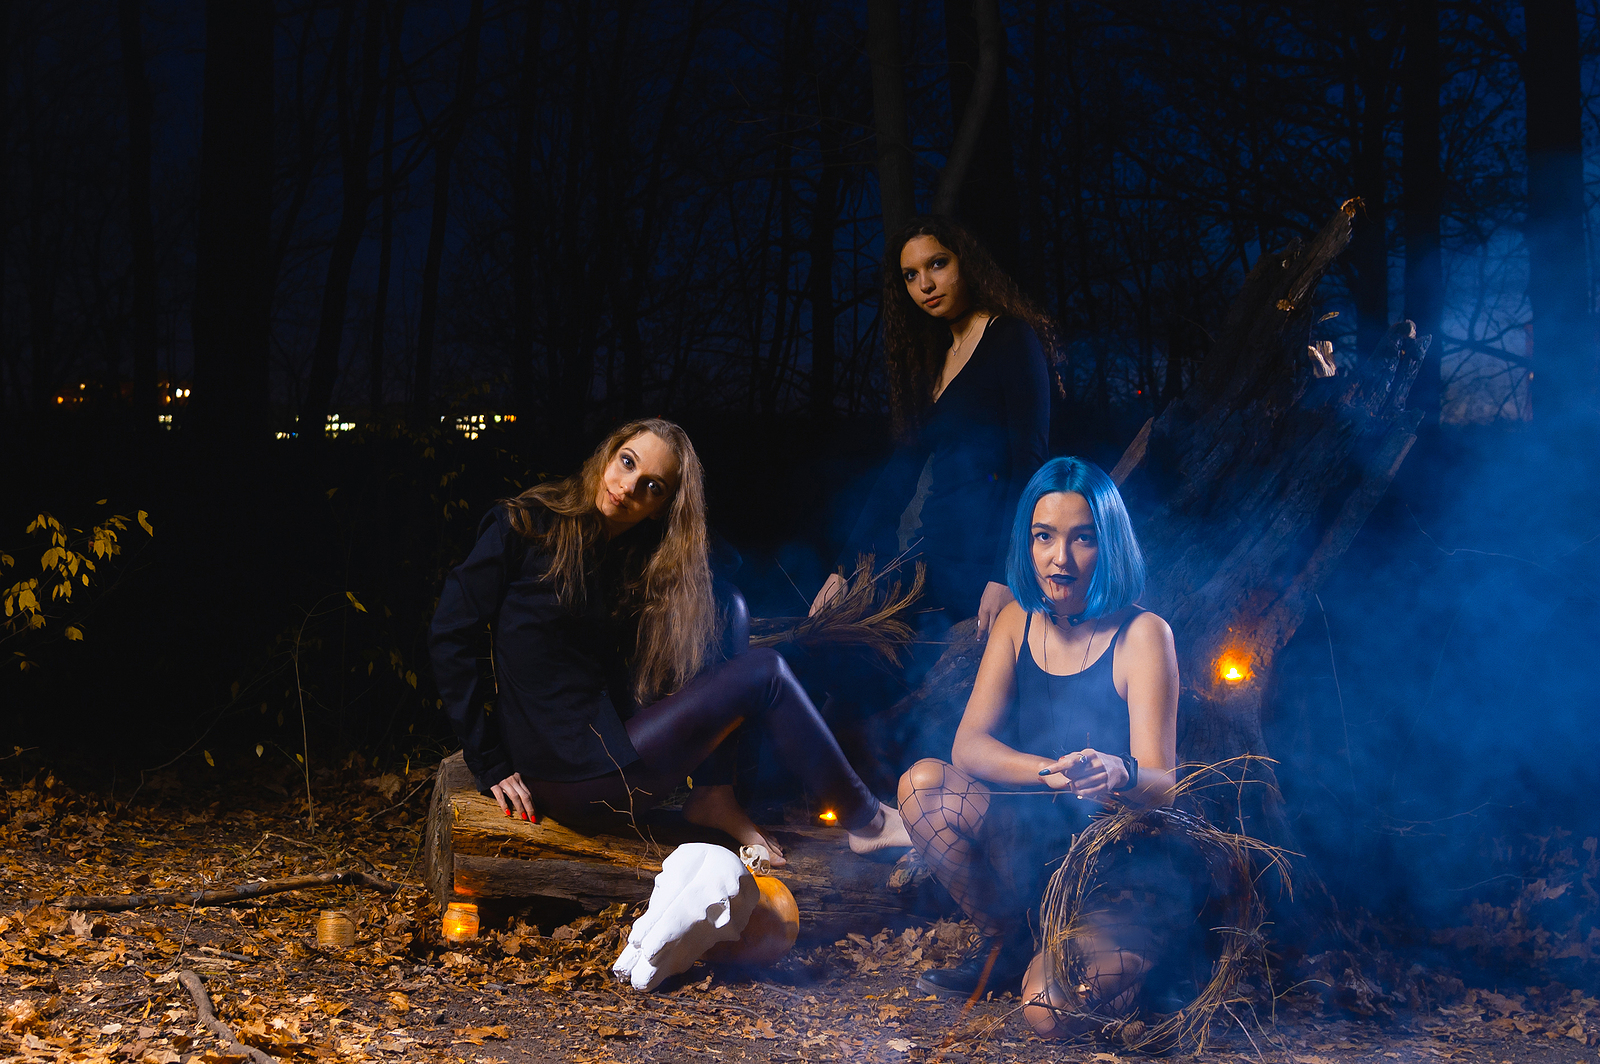 /A group of women sitting near woods with candles and smoke around them.